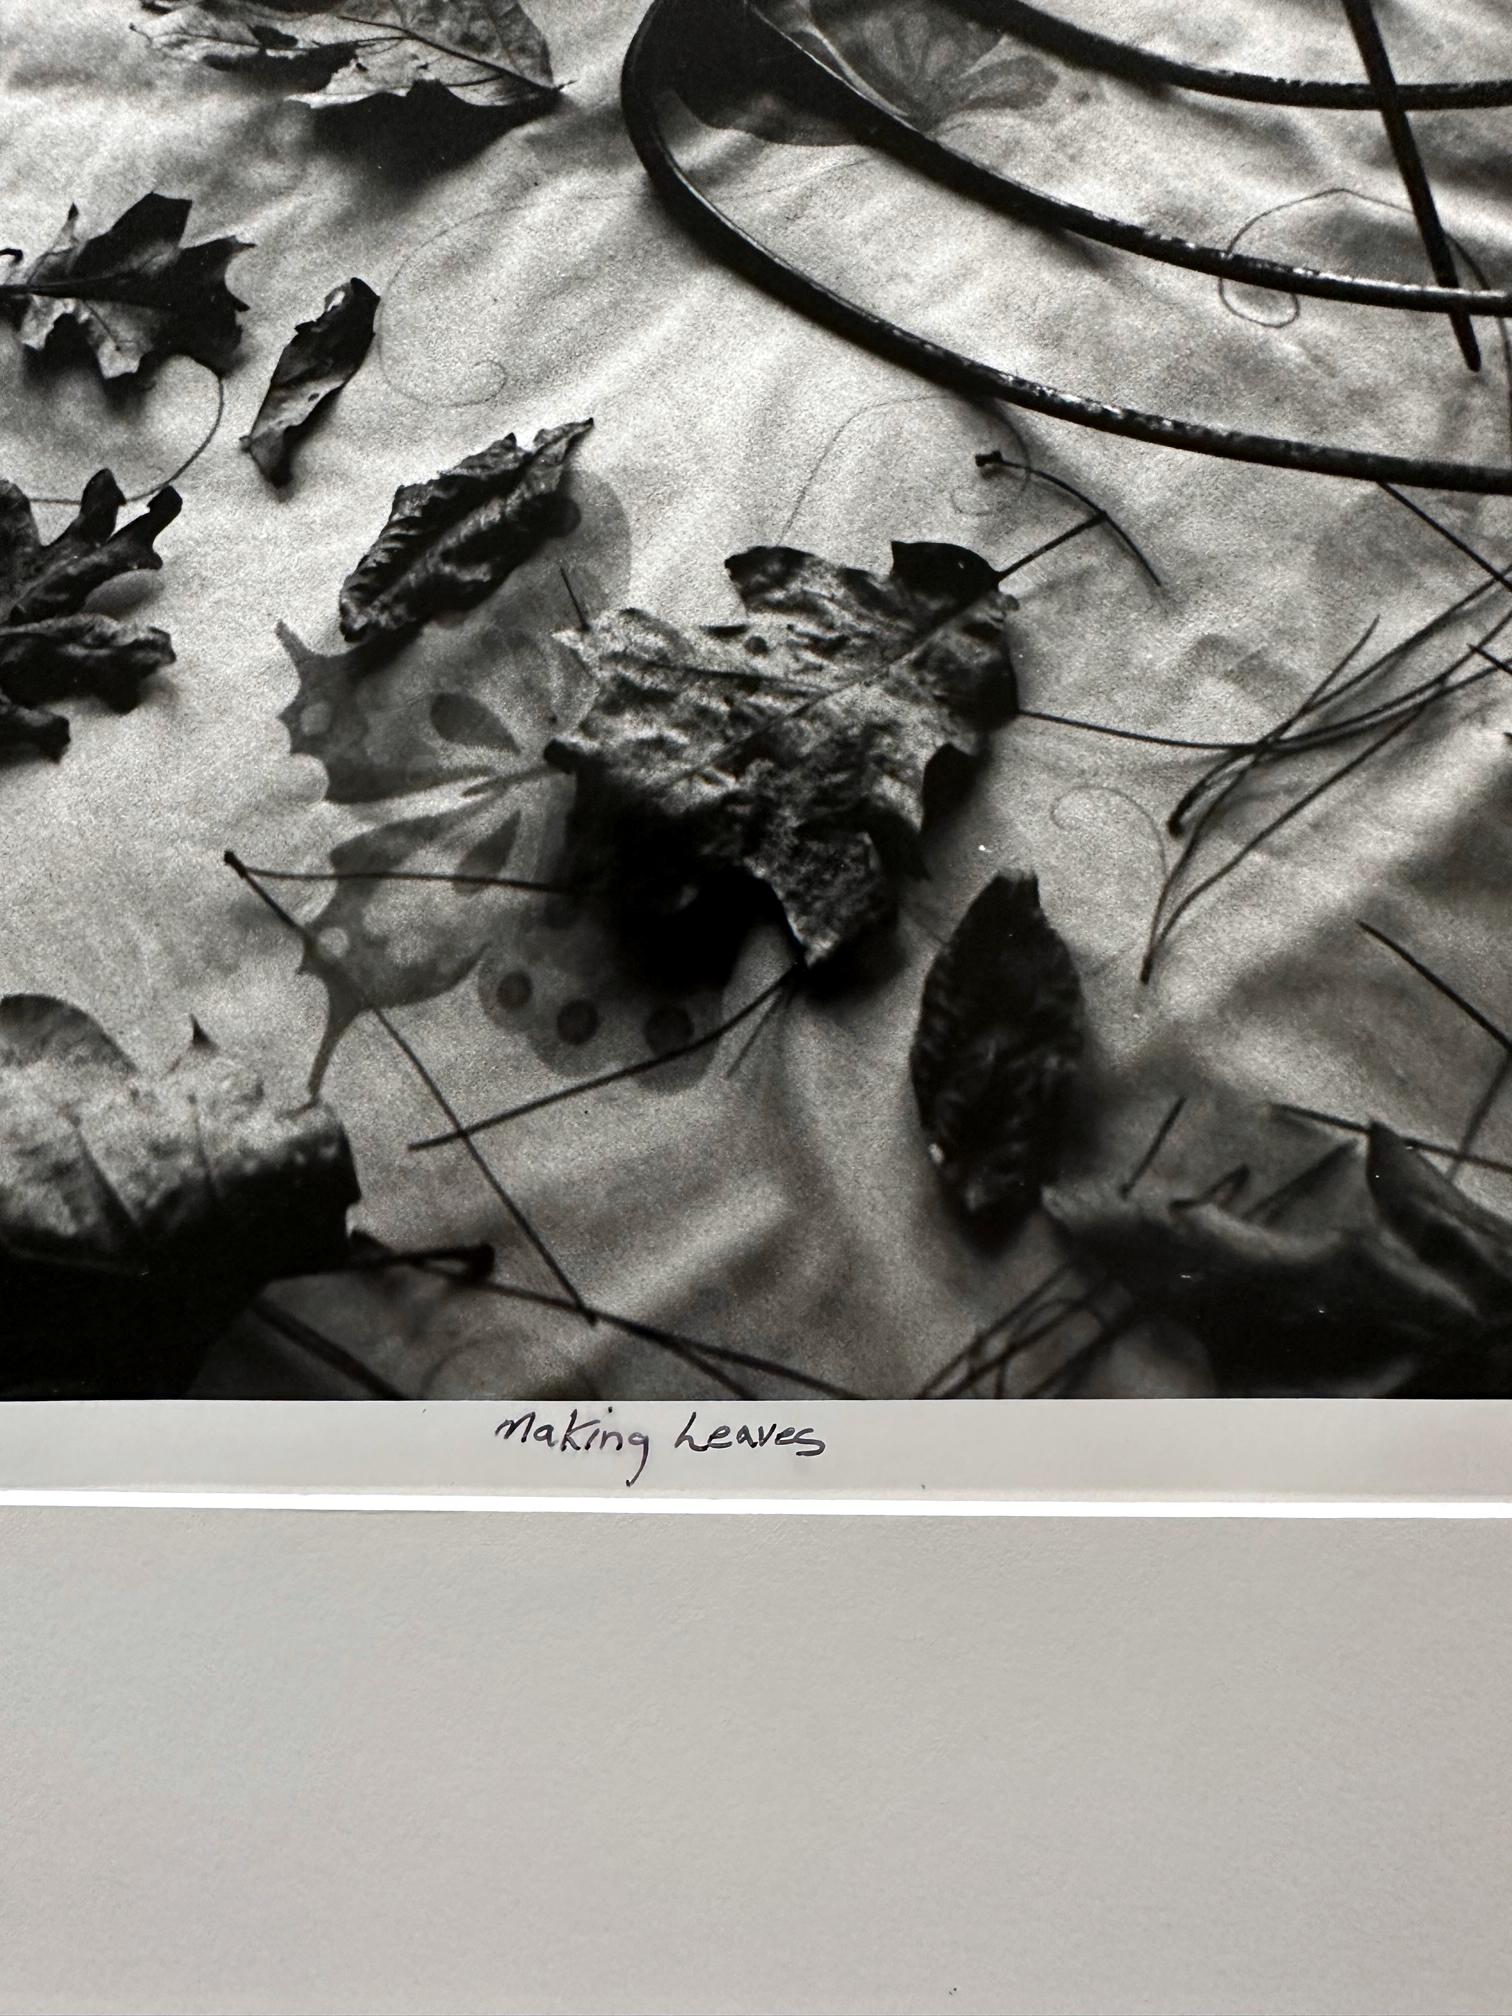 Framed Editioned Photograph Raking Leaves Arthur Tress In Good Condition For Sale In Atlanta, GA